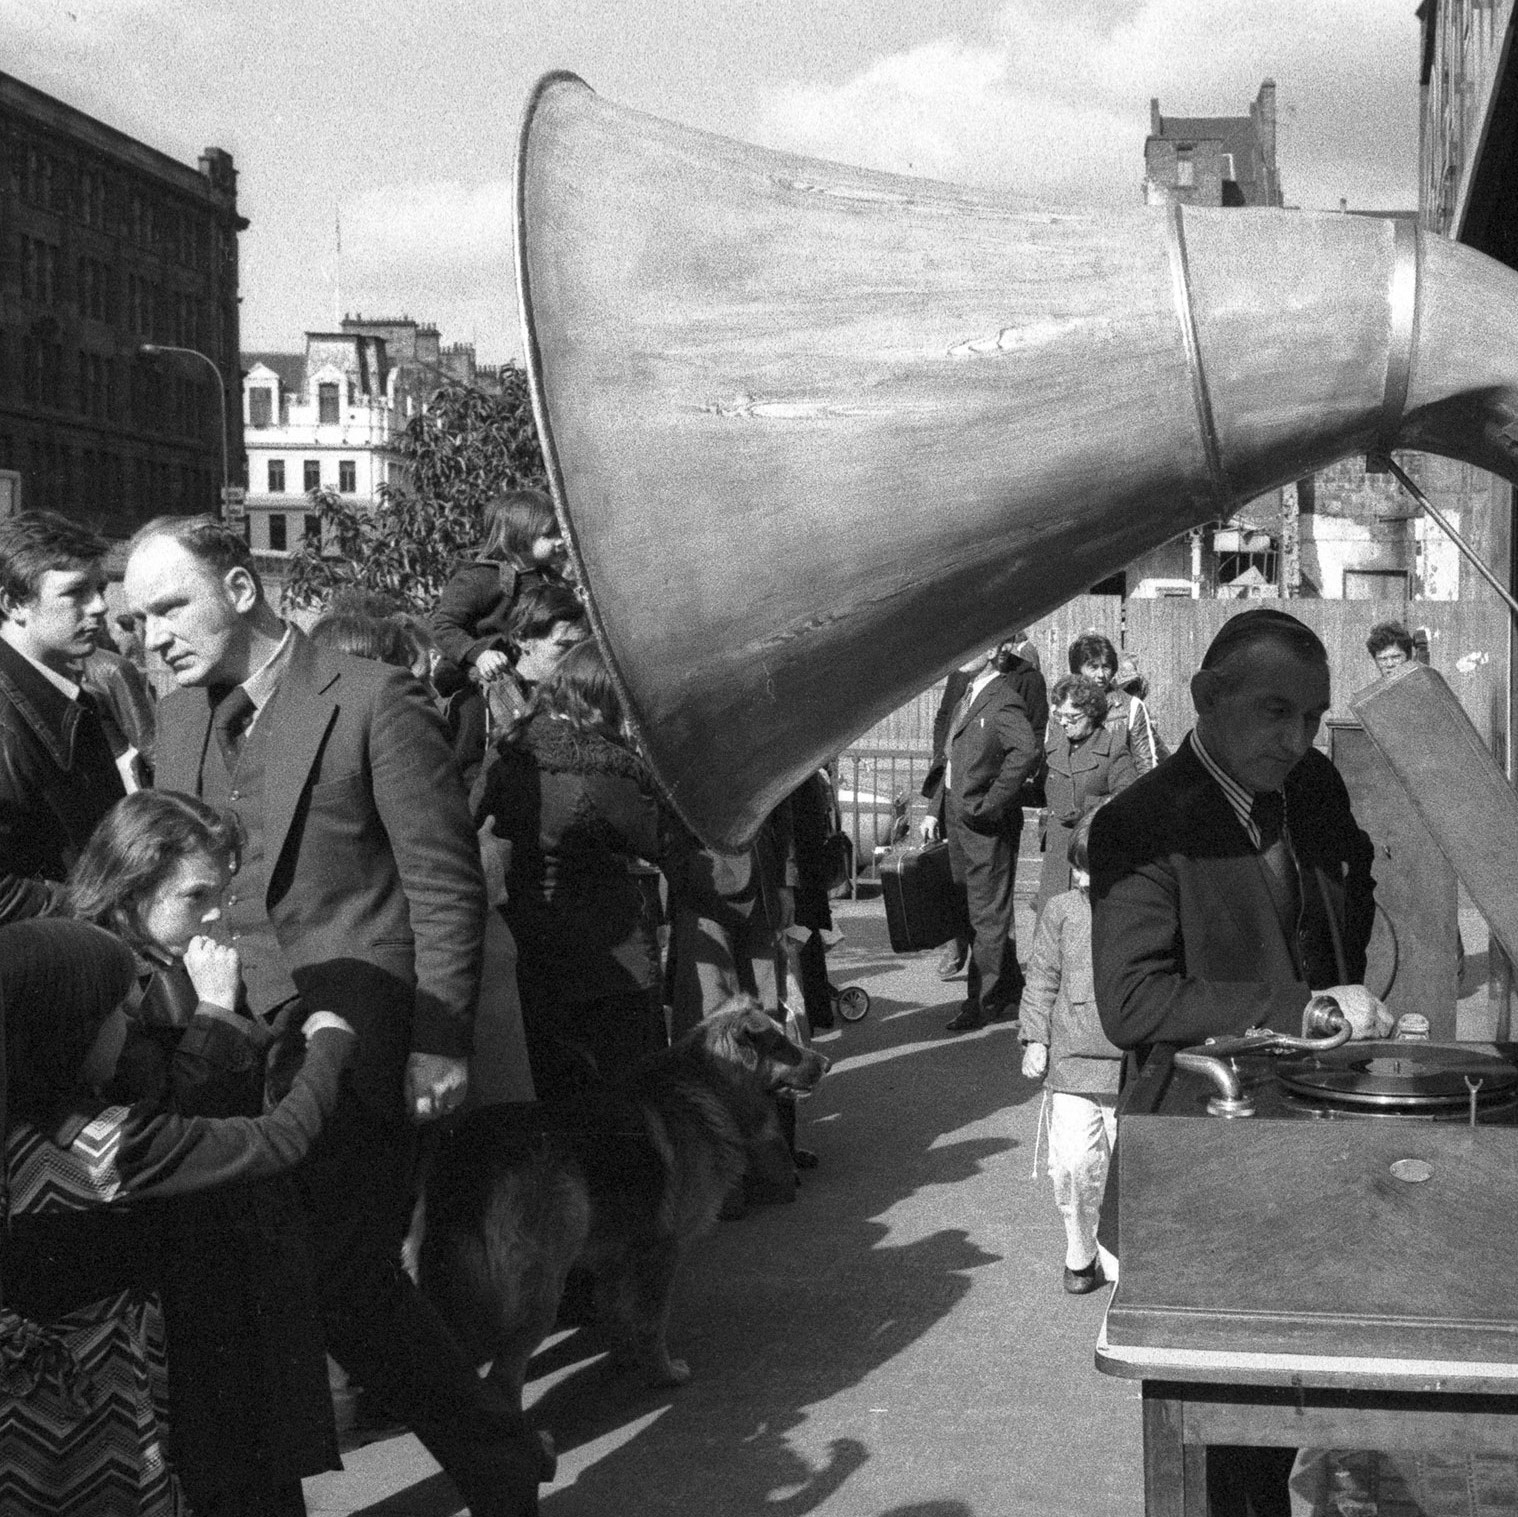 Image of Untitled, from 'Glasgow 1974'  (Gramophone) by Hugh Hood